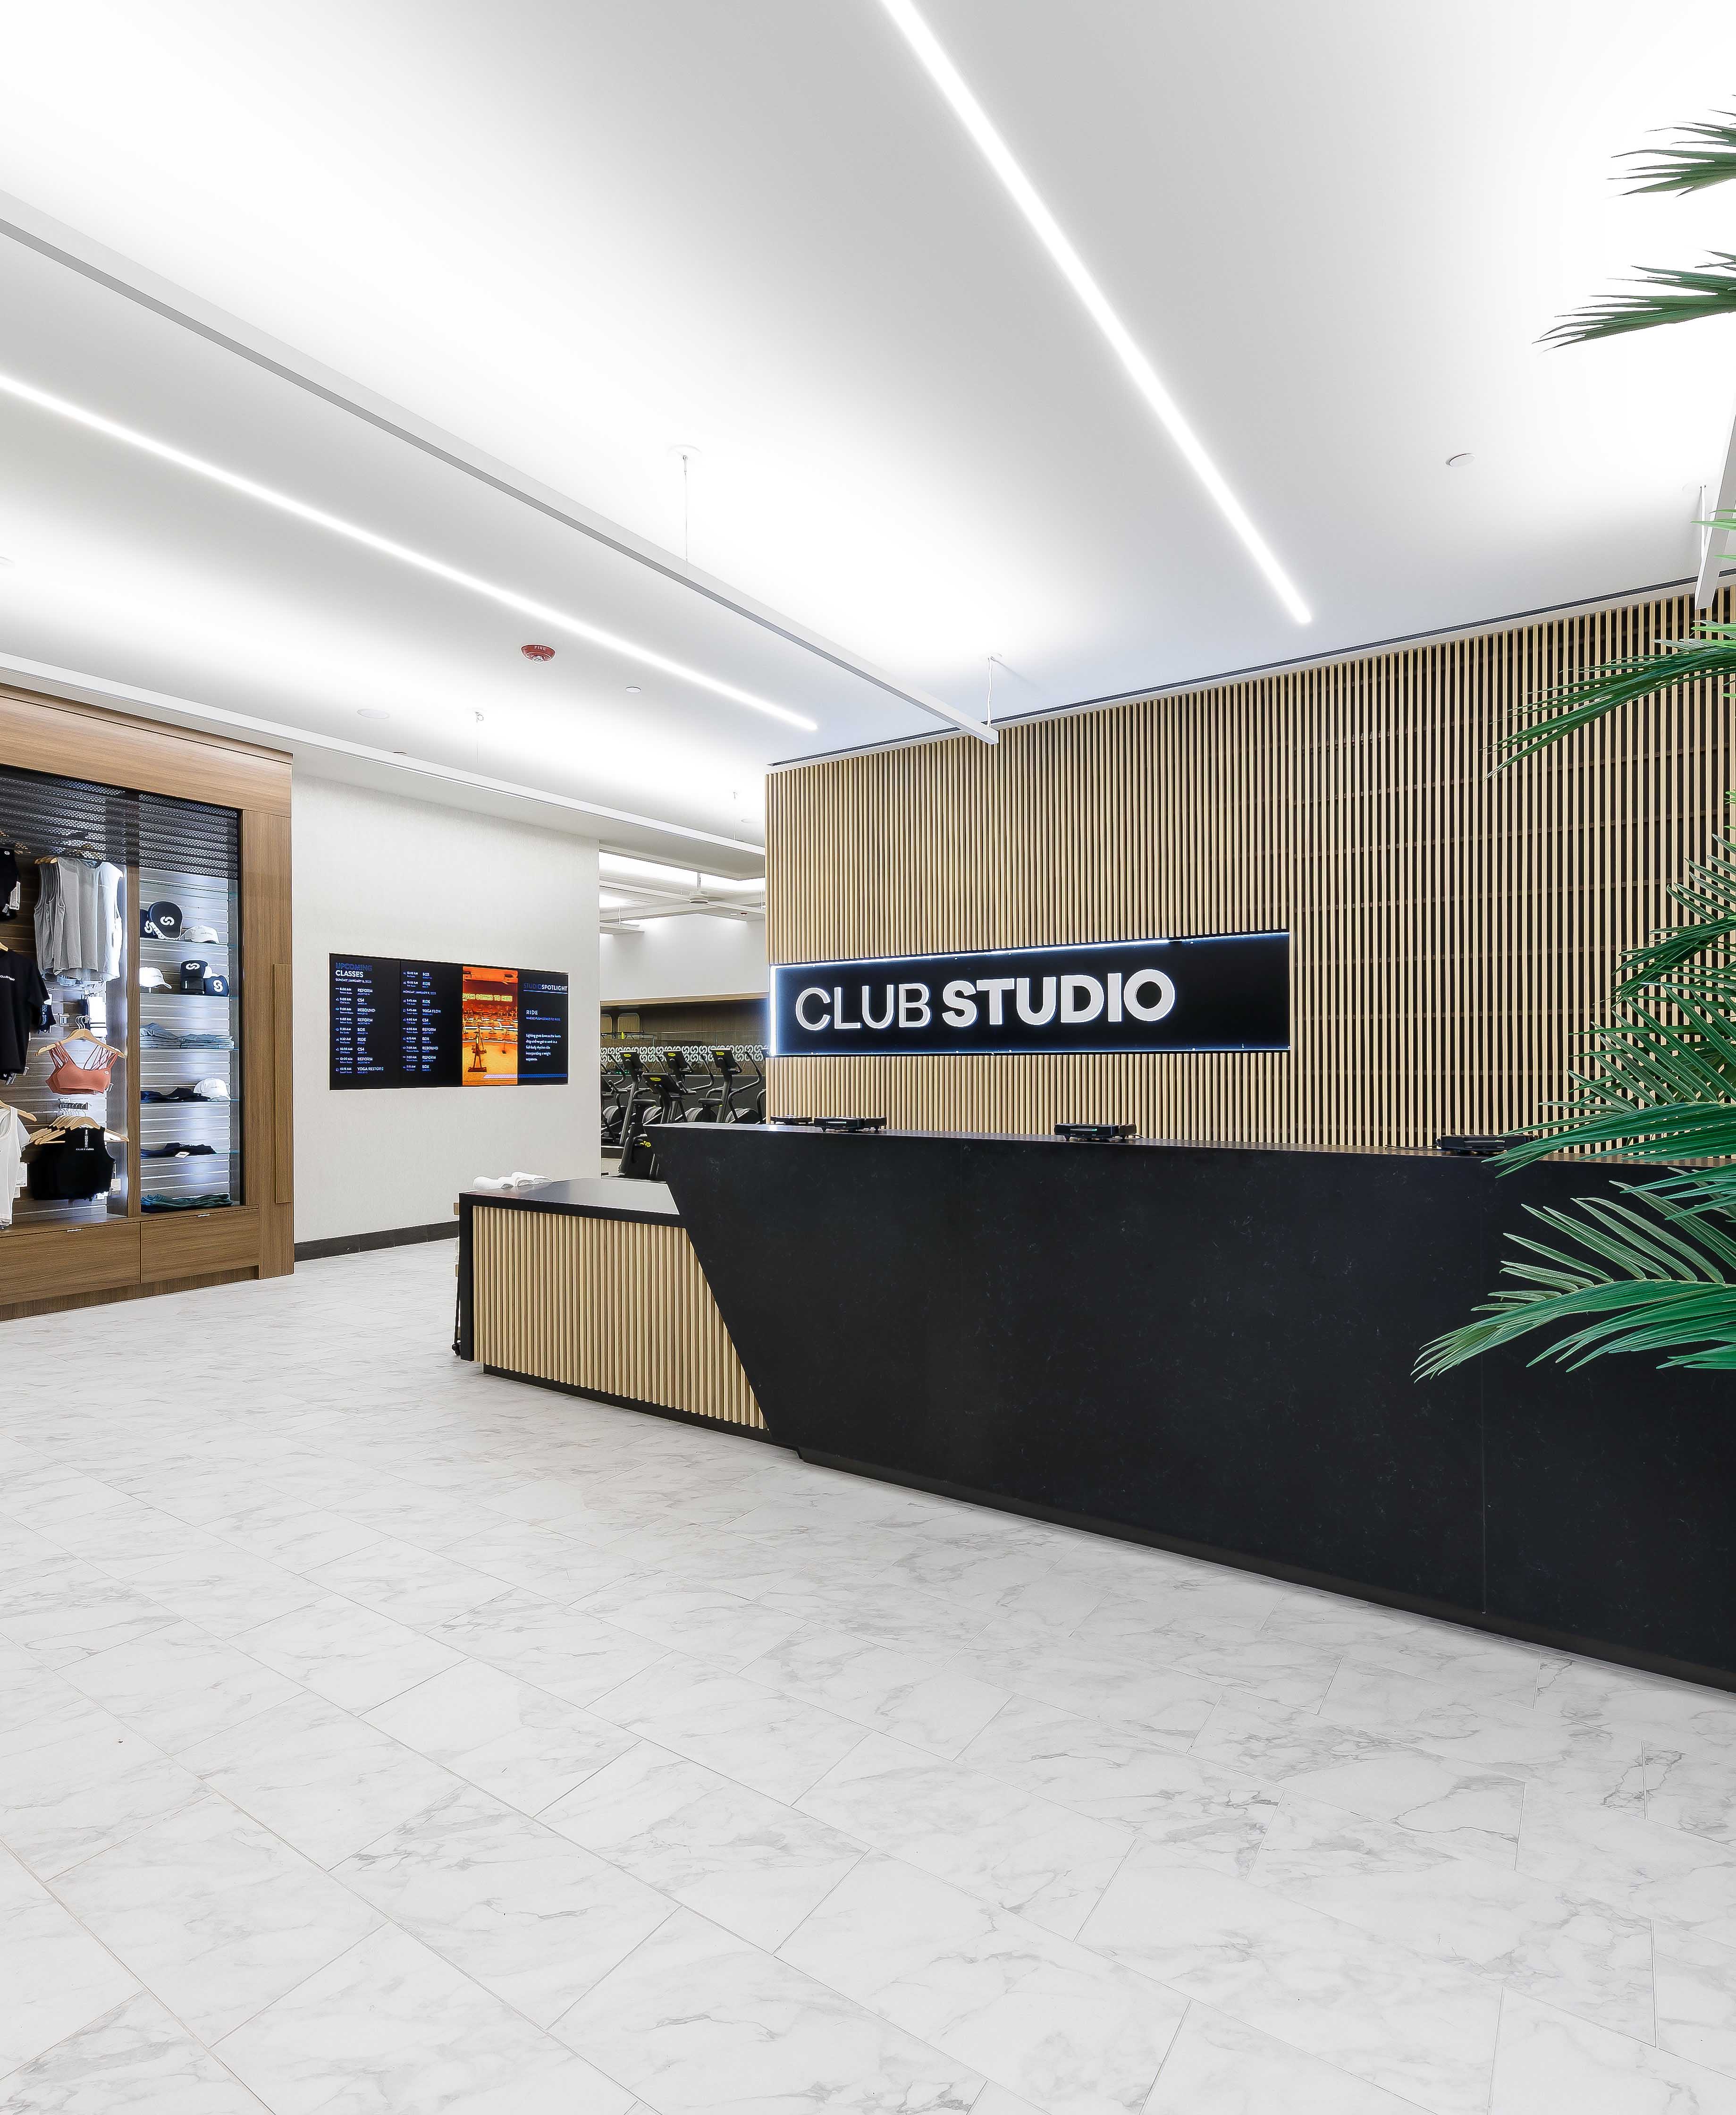 Club Studio interior image with front desk, workout apparel and Club Studio sign